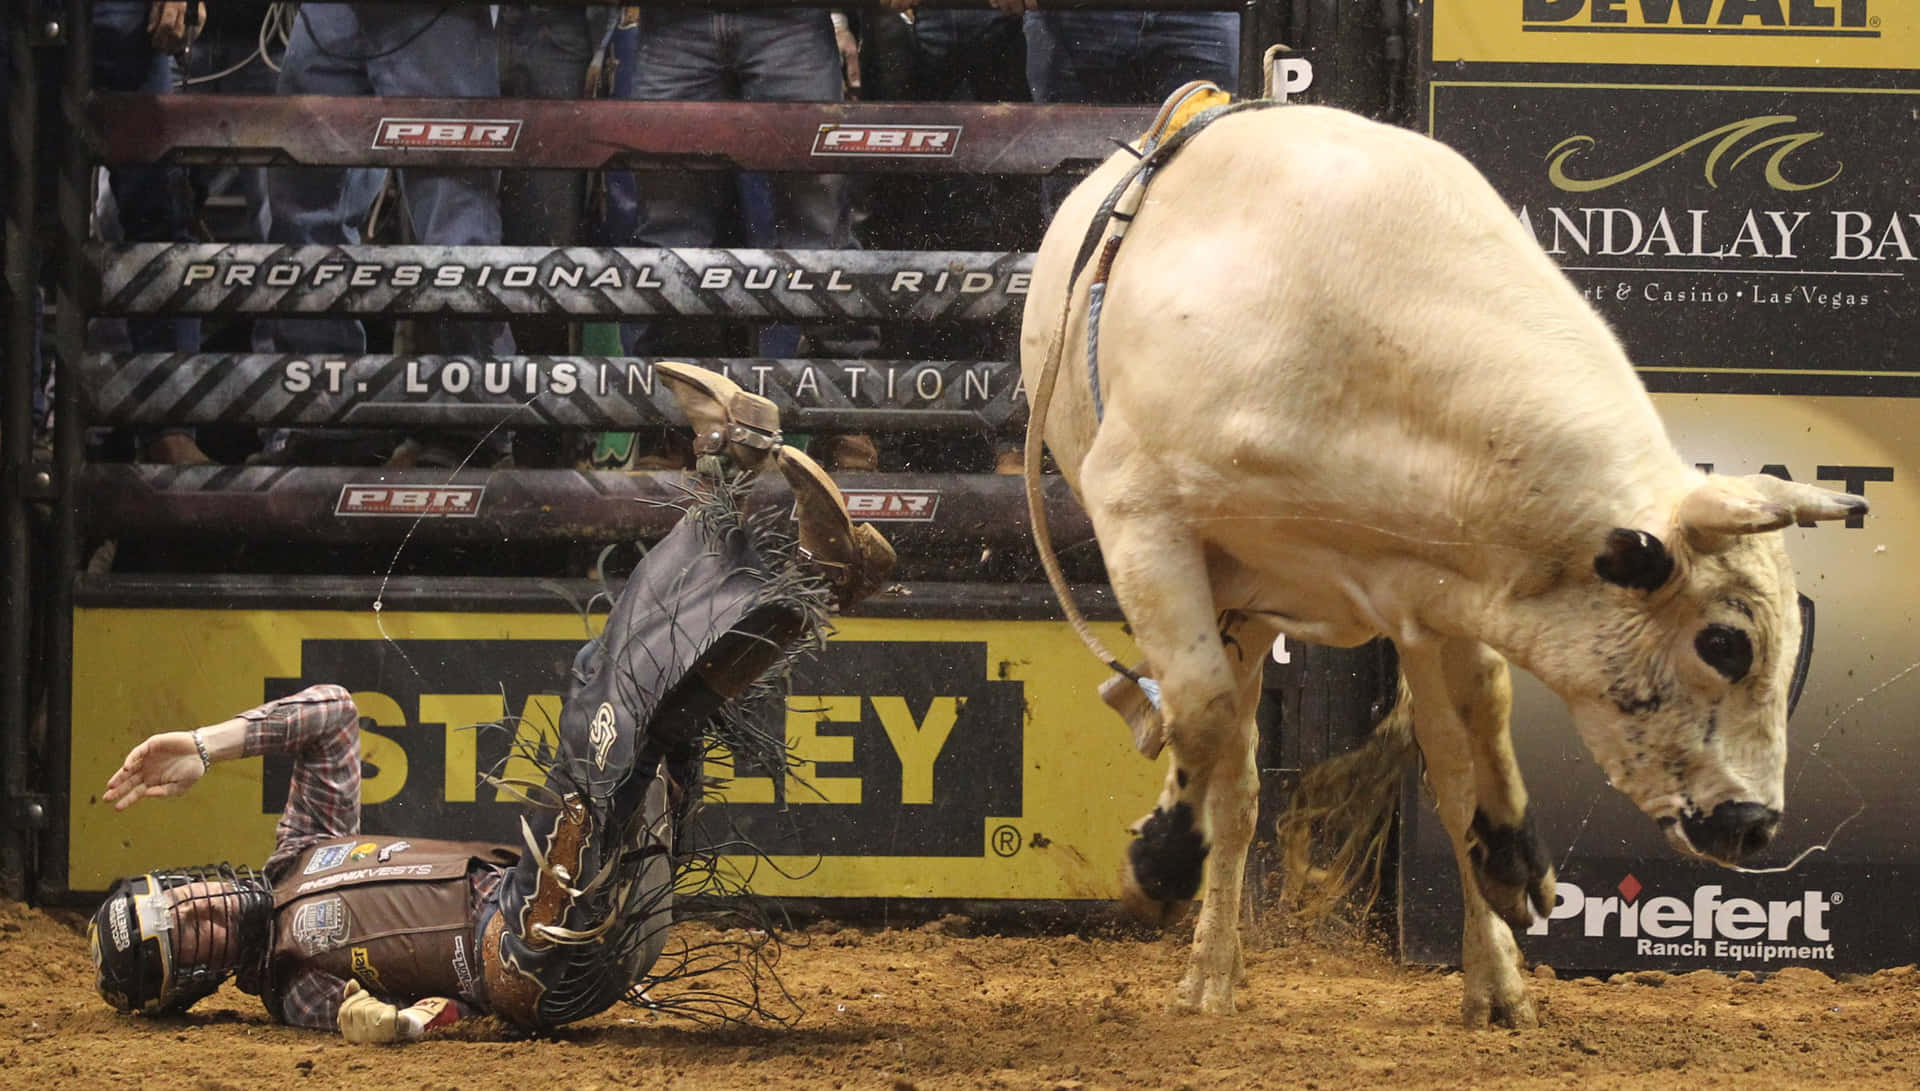 A bull rider heroically stands atop a bucking bull.